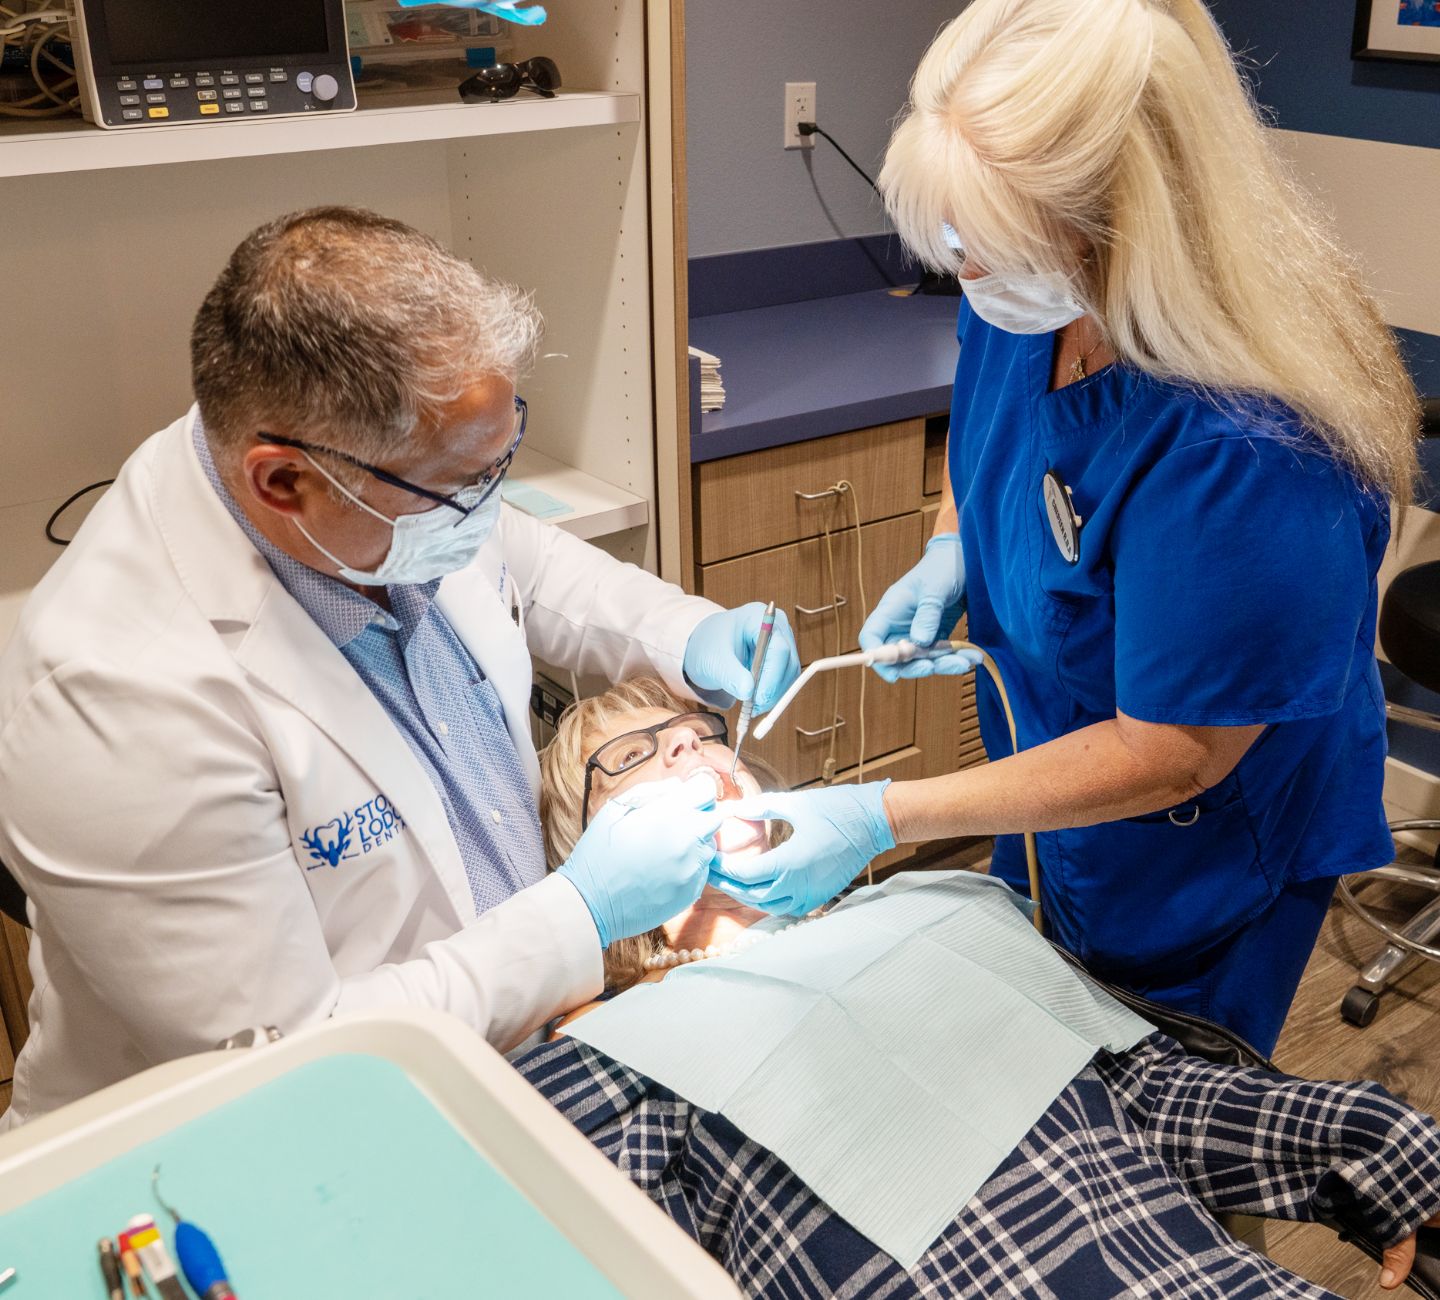 A patient receiving a dental cleaning